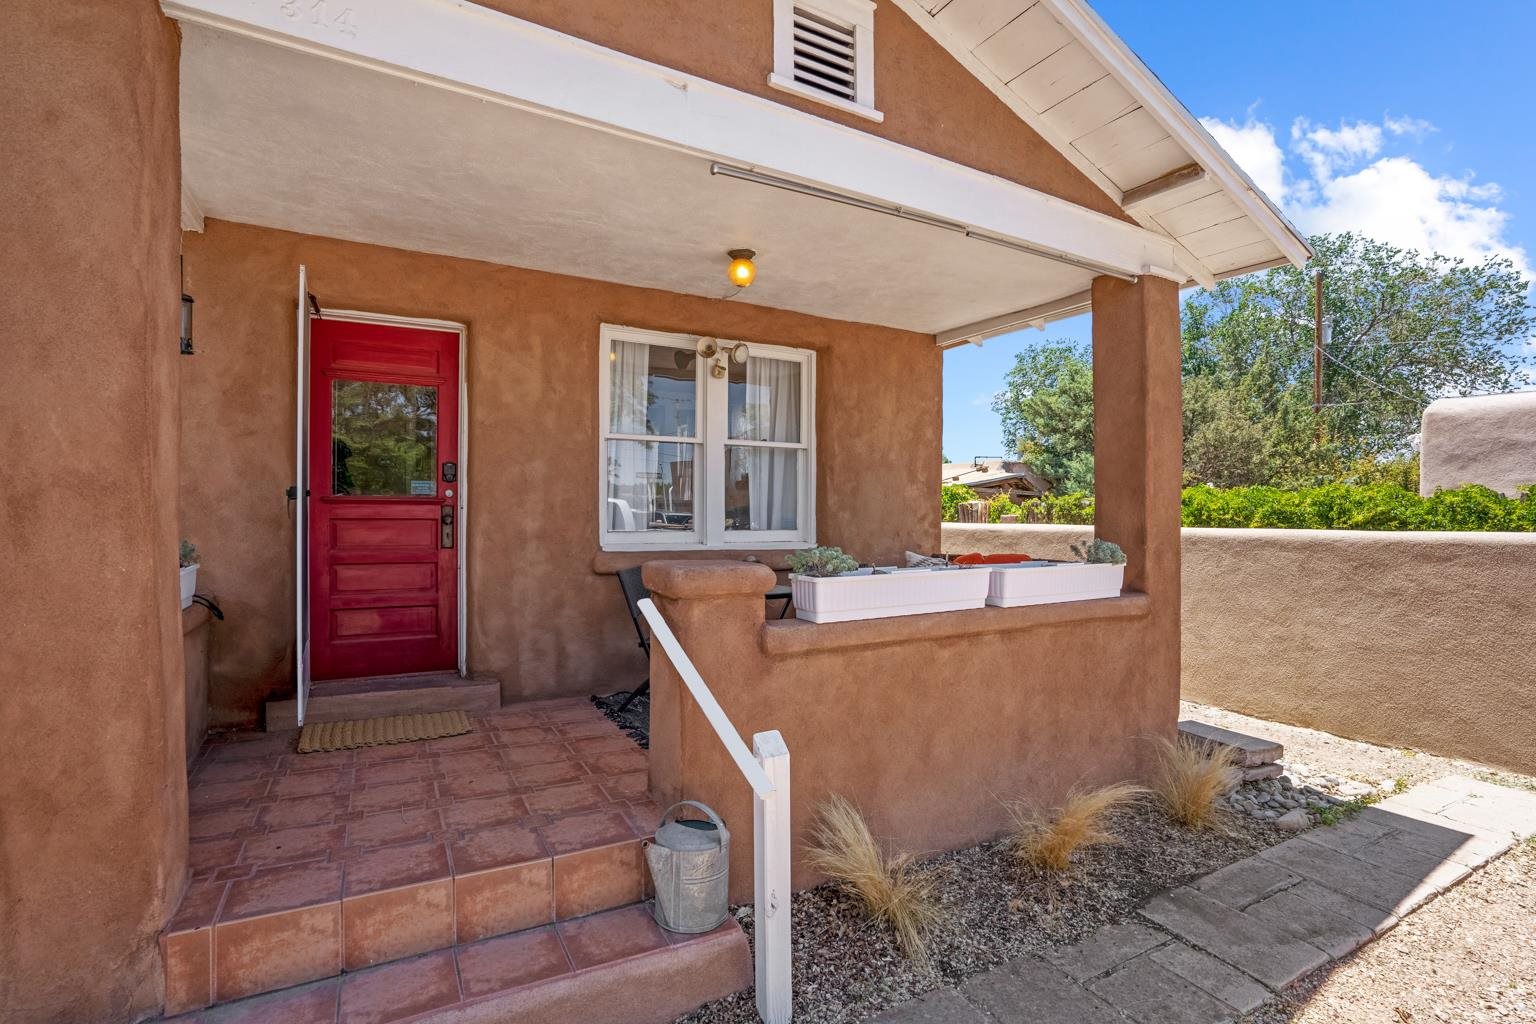 314 Guadalupe, Santa Fe, New Mexico 87501, 2 Bedrooms Bedrooms, ,1 BathroomBathrooms,Residential,For Sale,314 Guadalupe,202102633